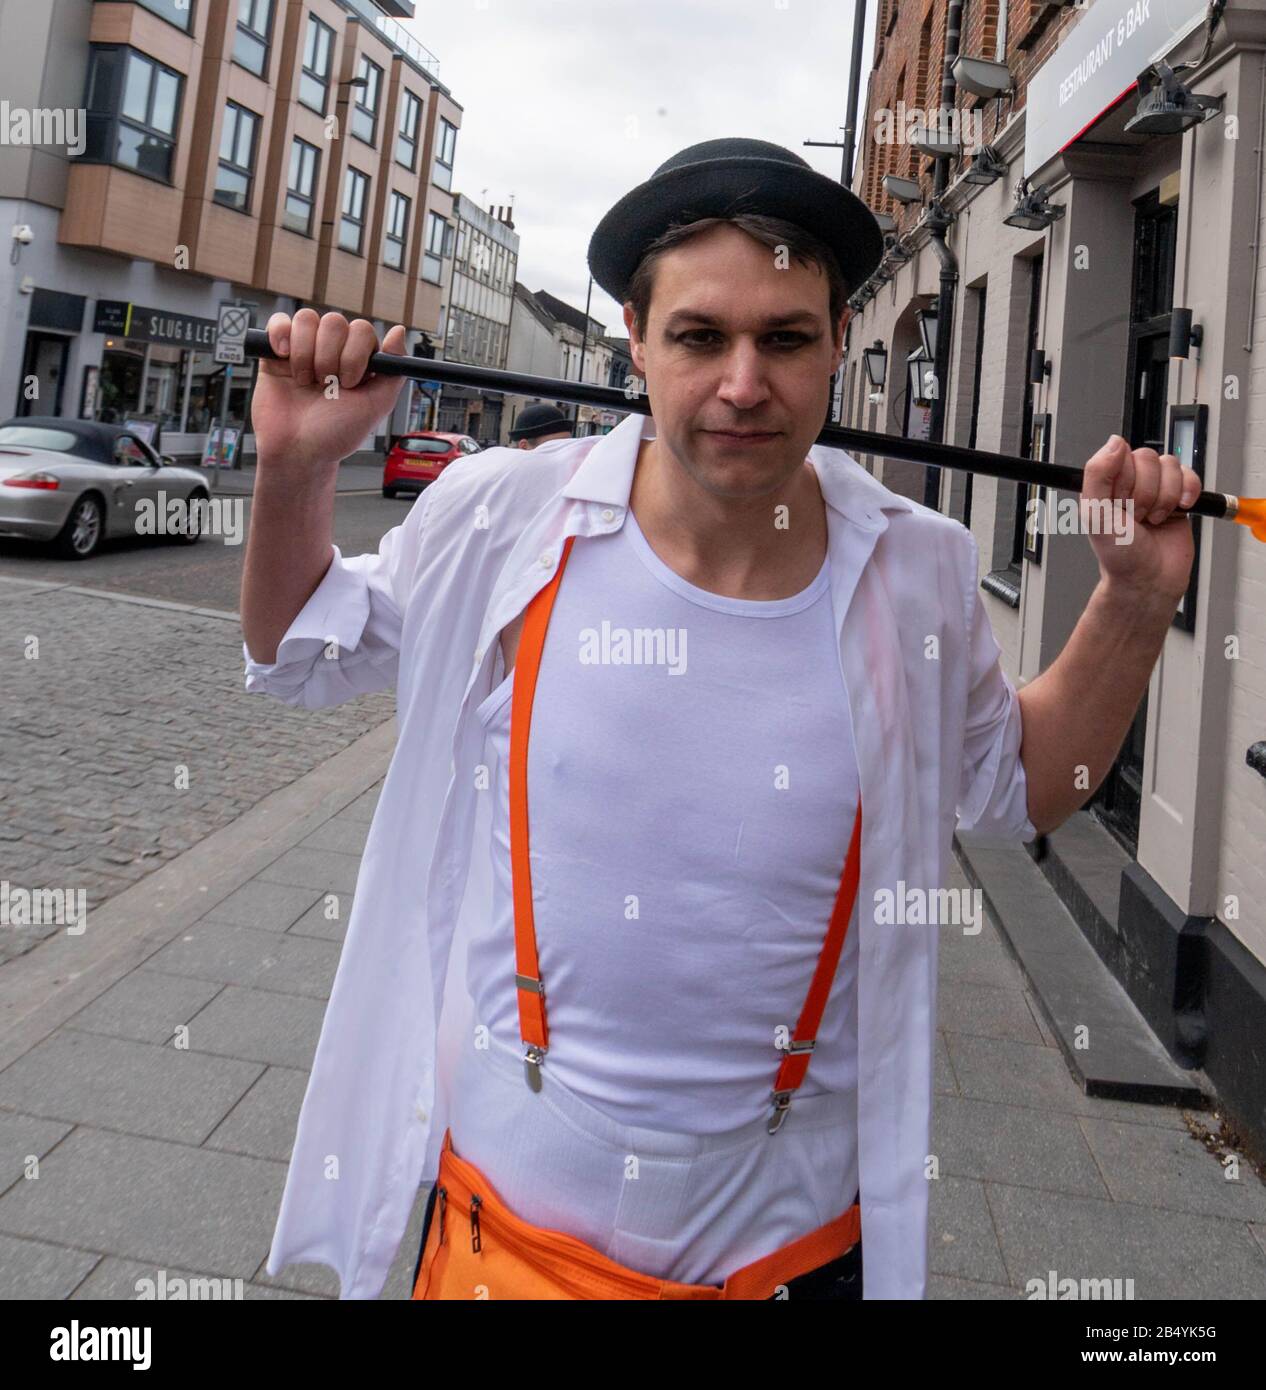 Brentwood Essex, UK. 7th Mar, 2020. Early Doors Productions revival of the play ' A Clockwork Orange' at the Brentwood Theatre, Brentwood Essex UK. Ben Martins outside the TOWIE Sugar Hut, Credit: Ian Davidson/Alamy Live News Stock Photo